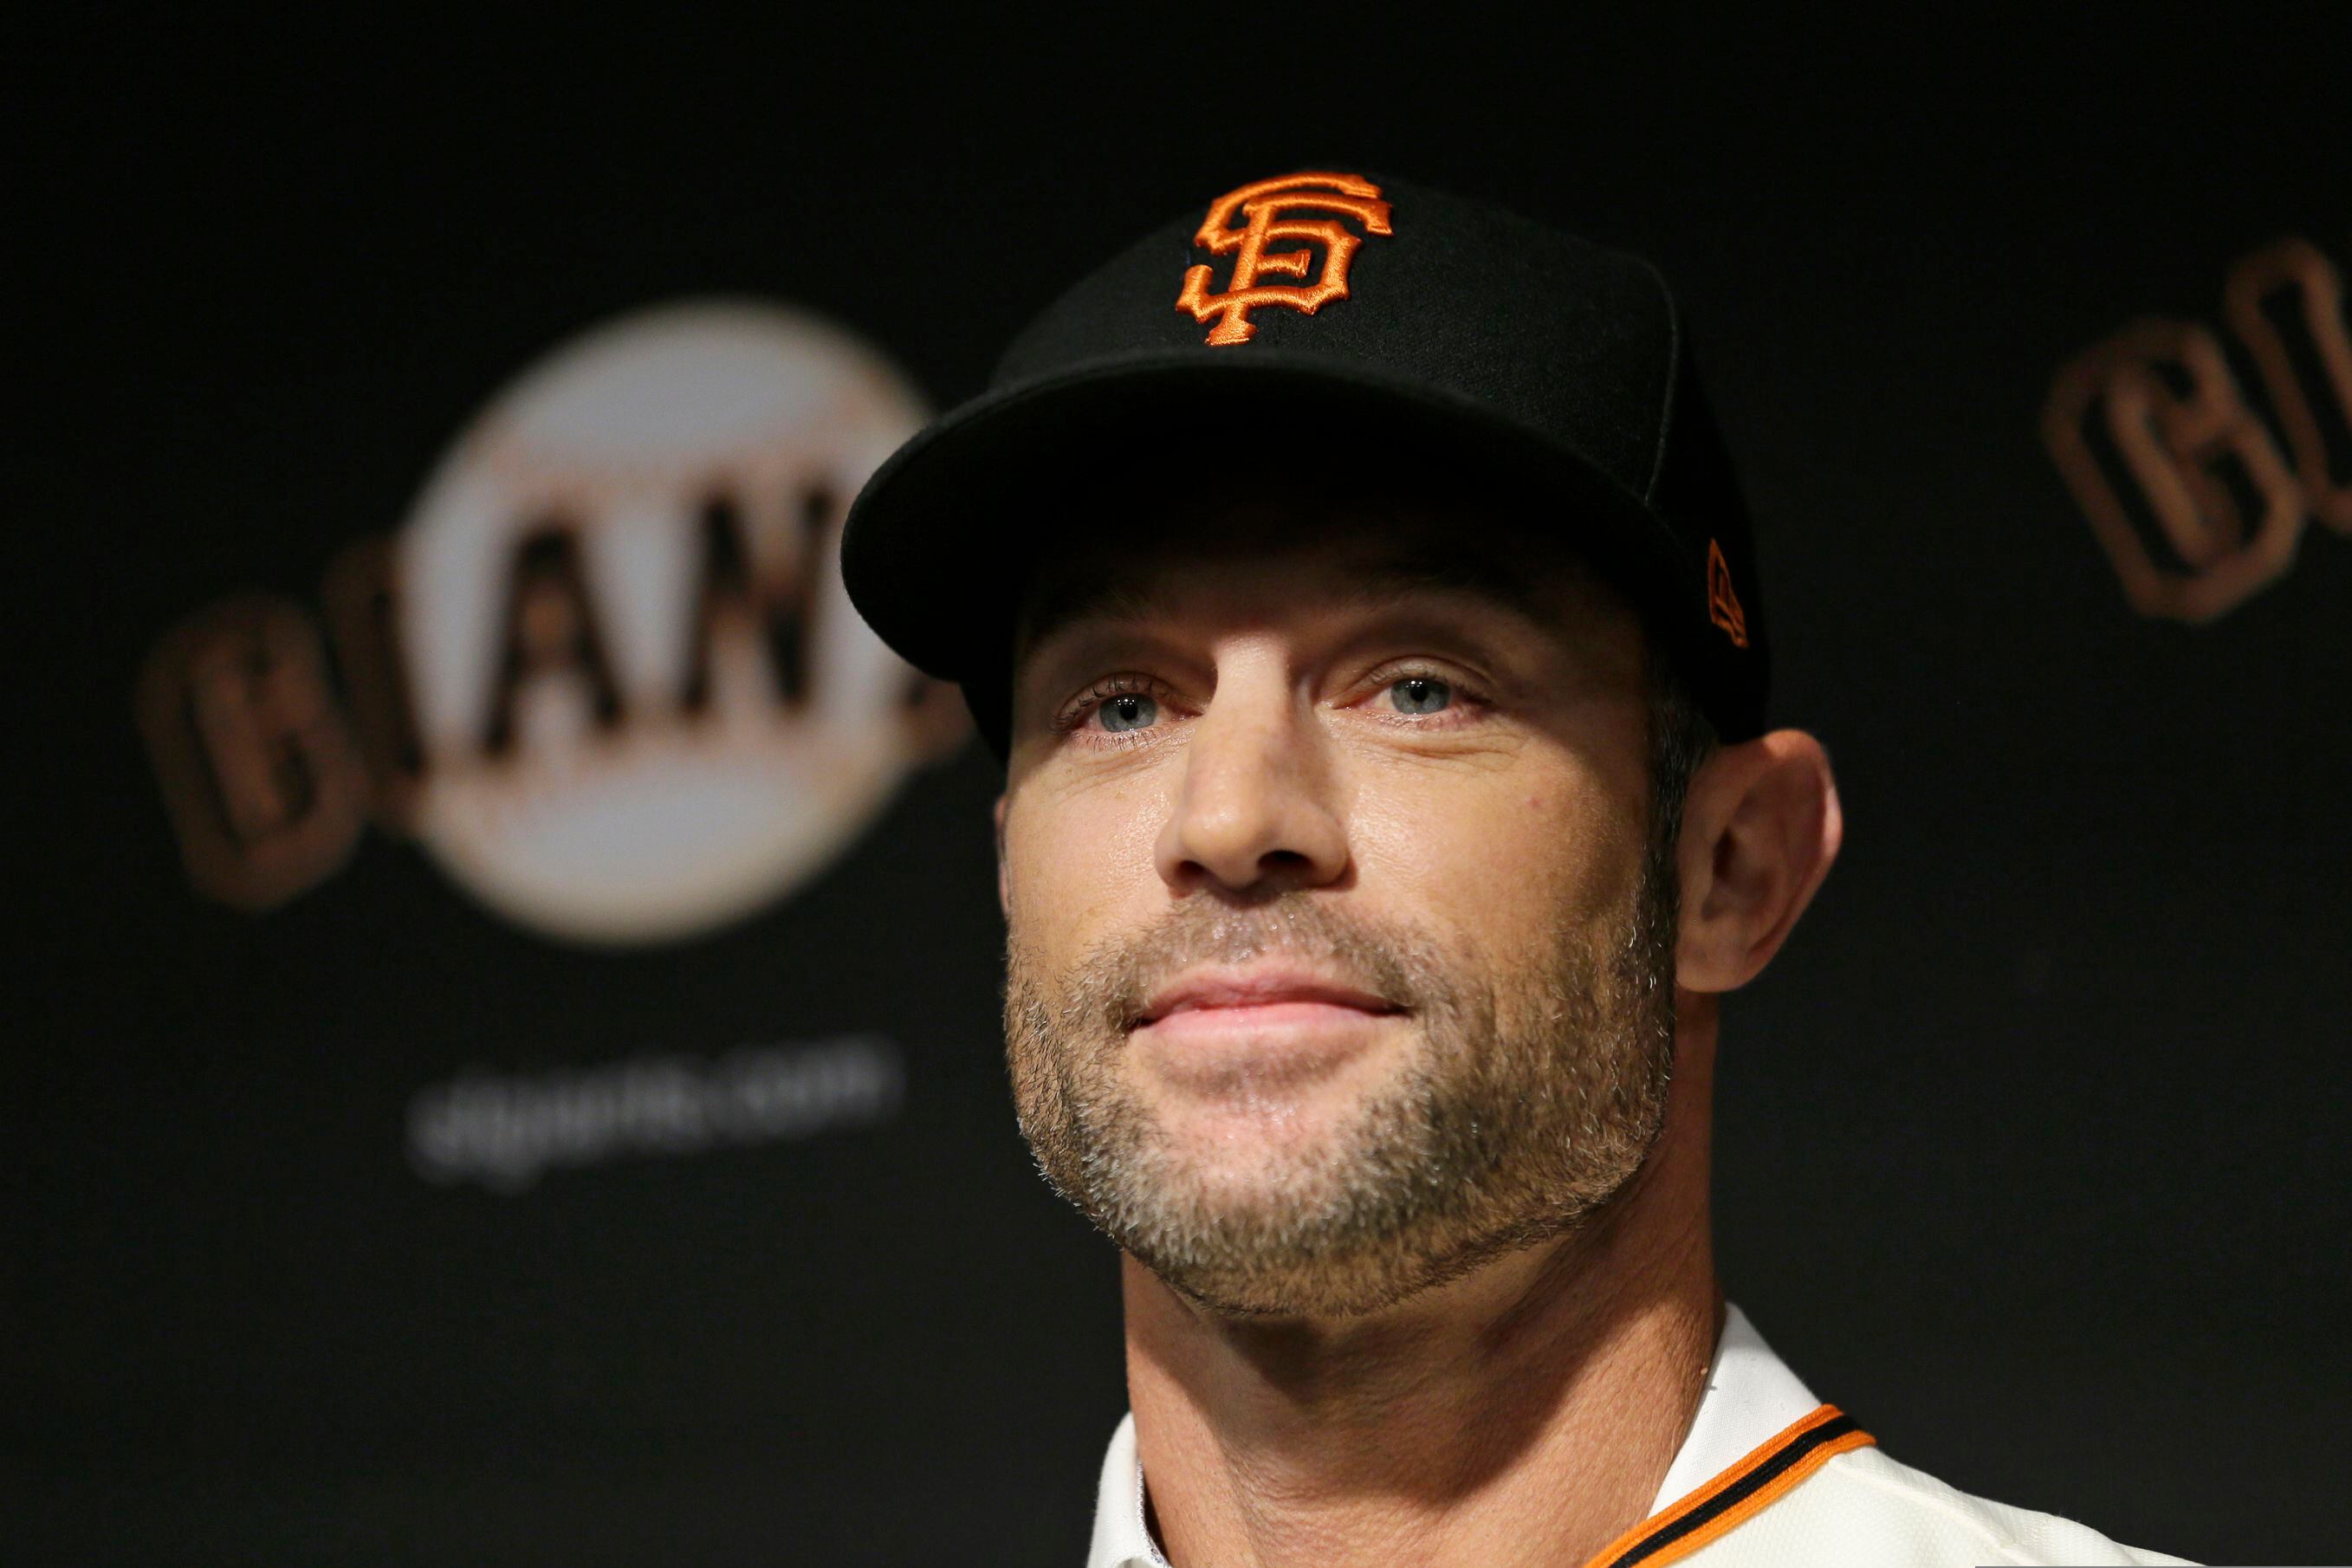 Gabe Kapler's San Francisco Giants passed the Phillies in the wild